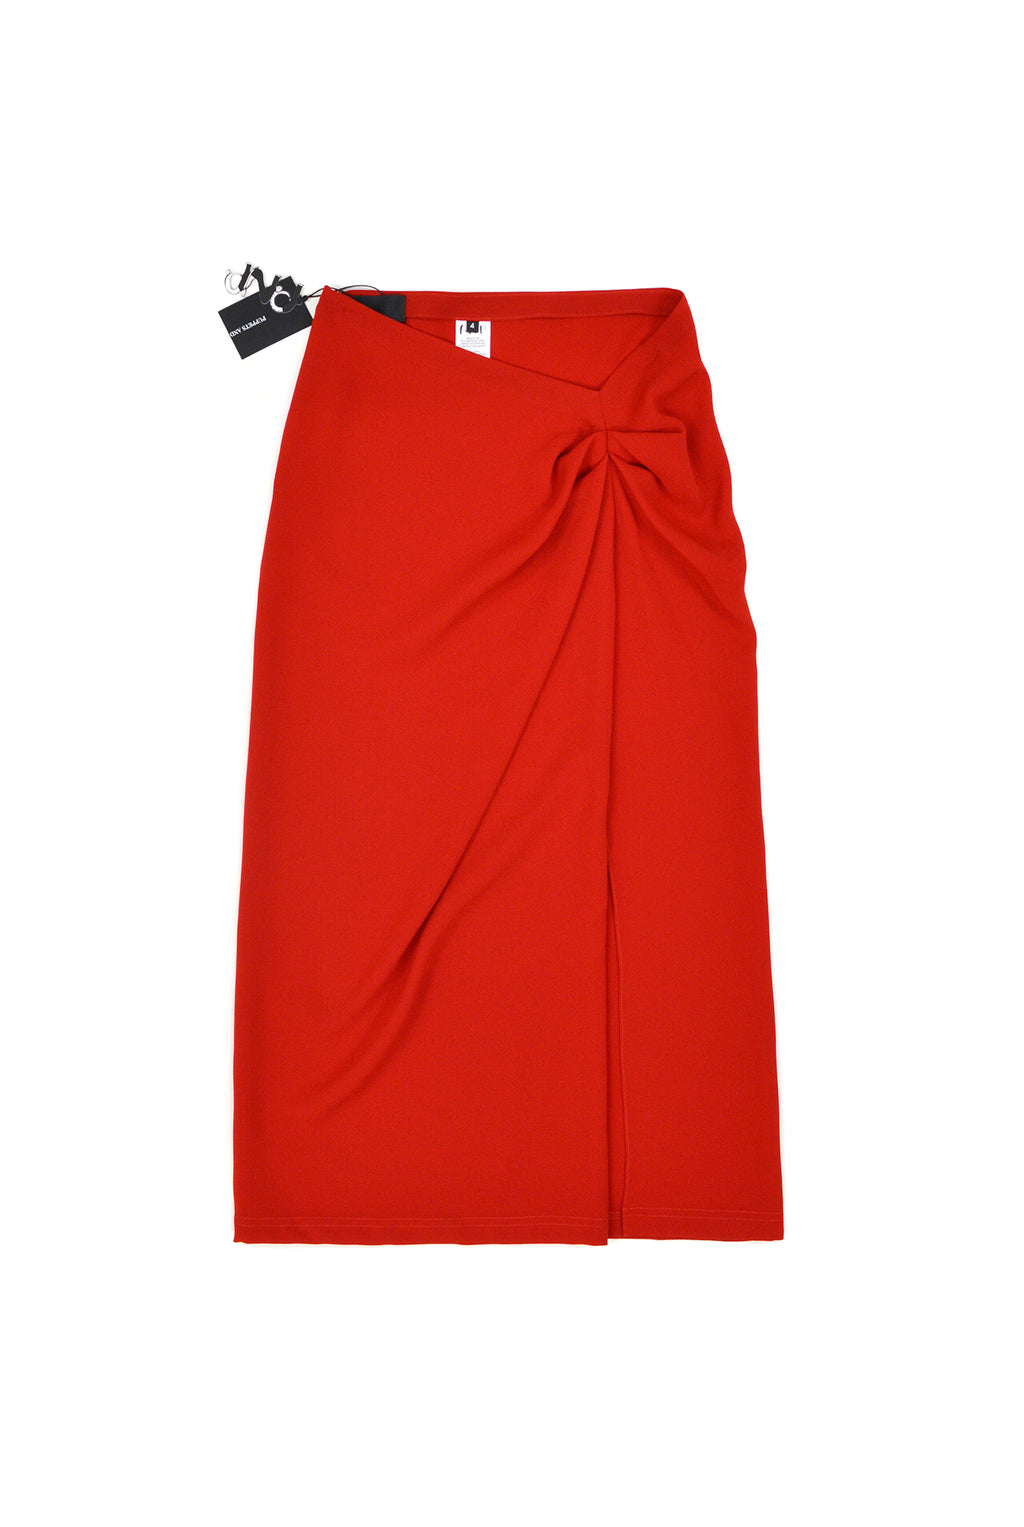 Puppets and Puppets Draped Midi Skirt, Red